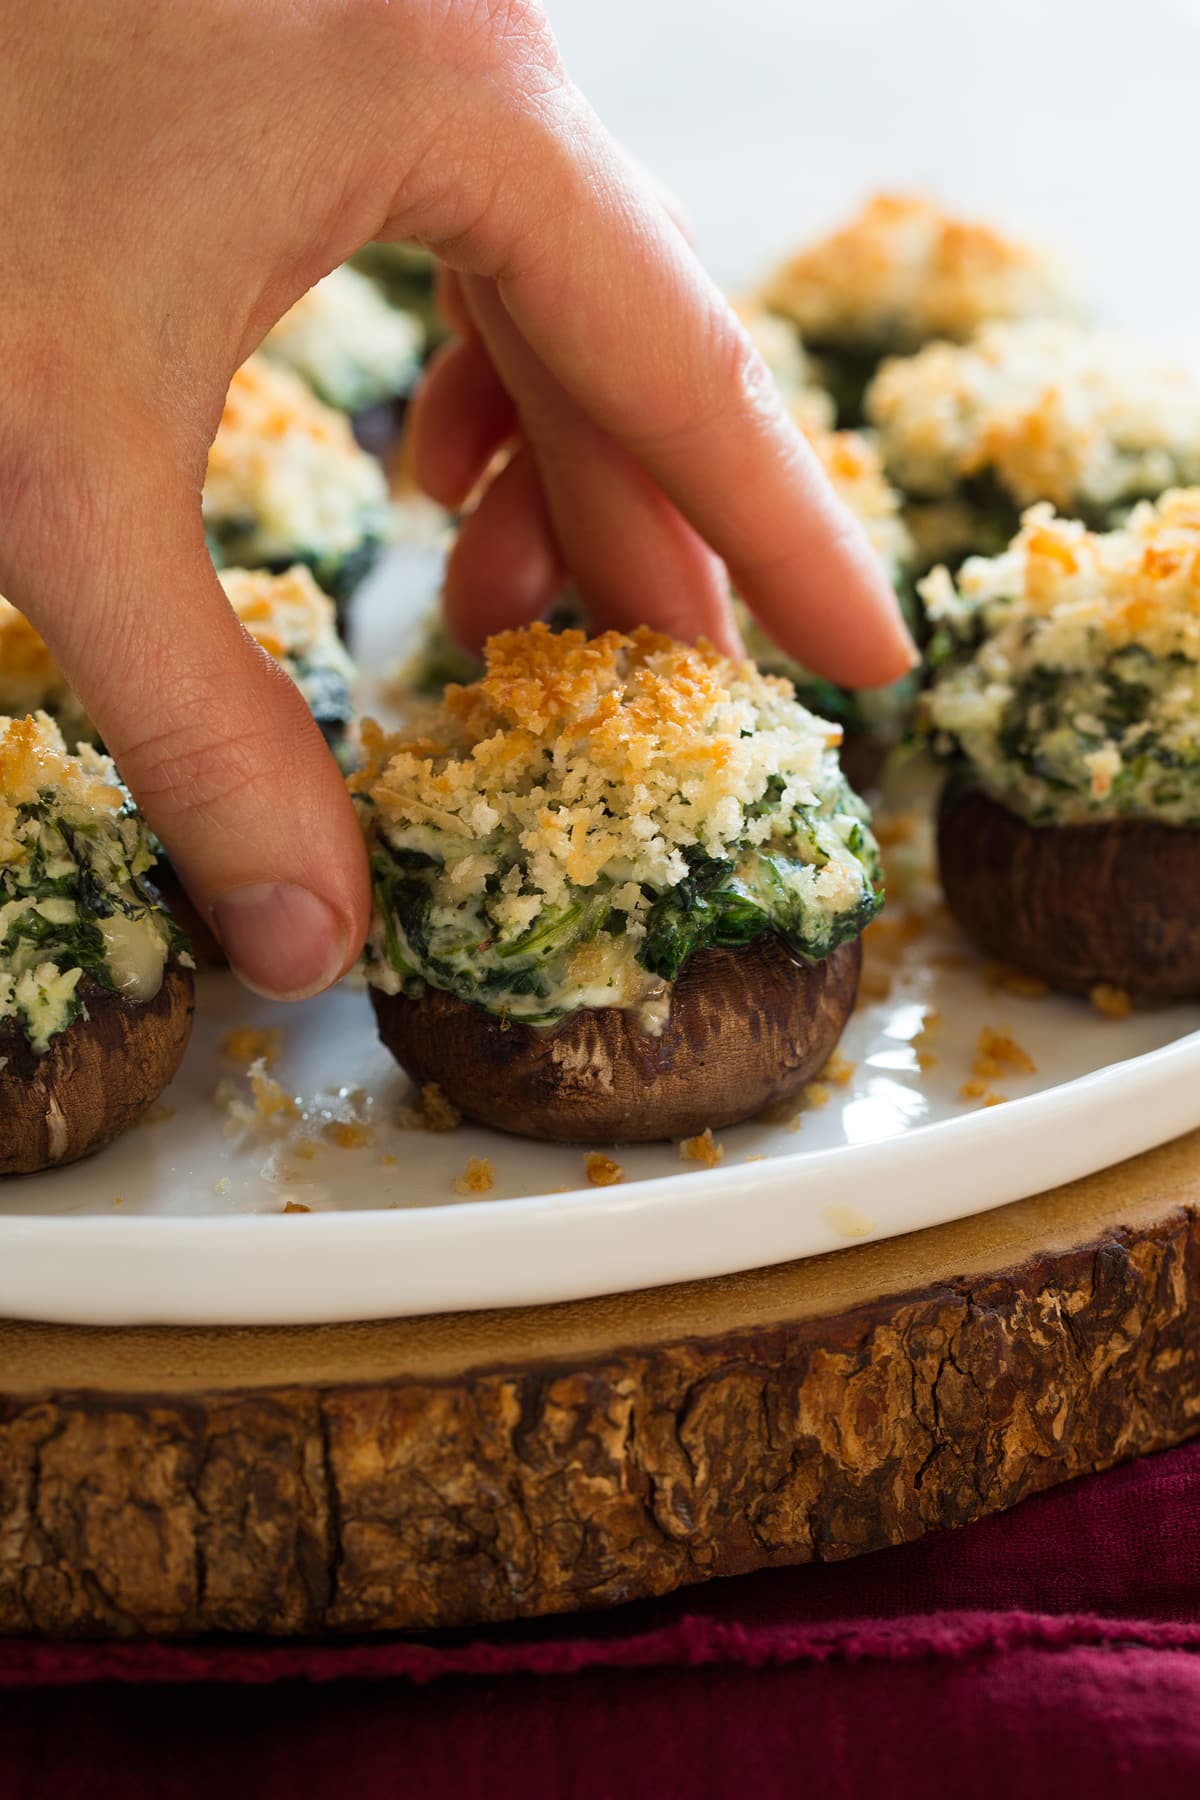 Hand picking up a stuffed mushrooms filled with cream cheese, shredded cheeses and spinach.